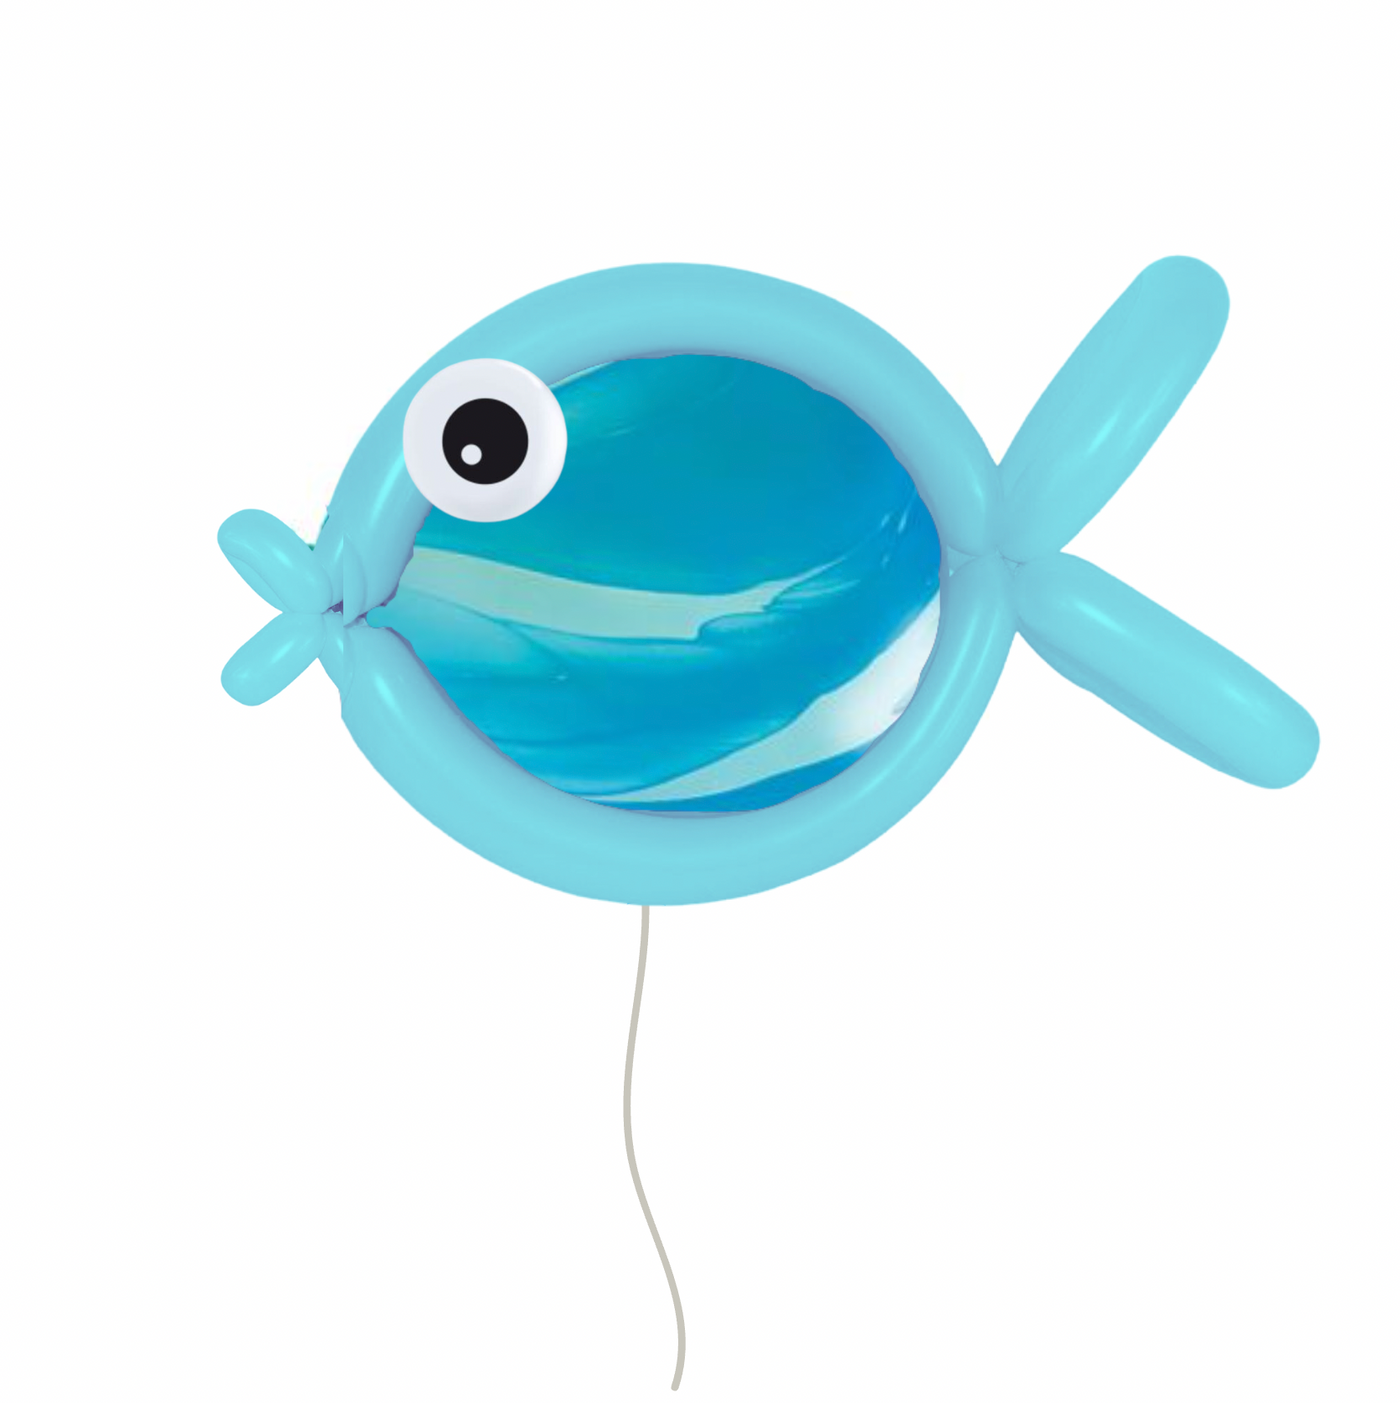 Twisted Floating Fish Balloon